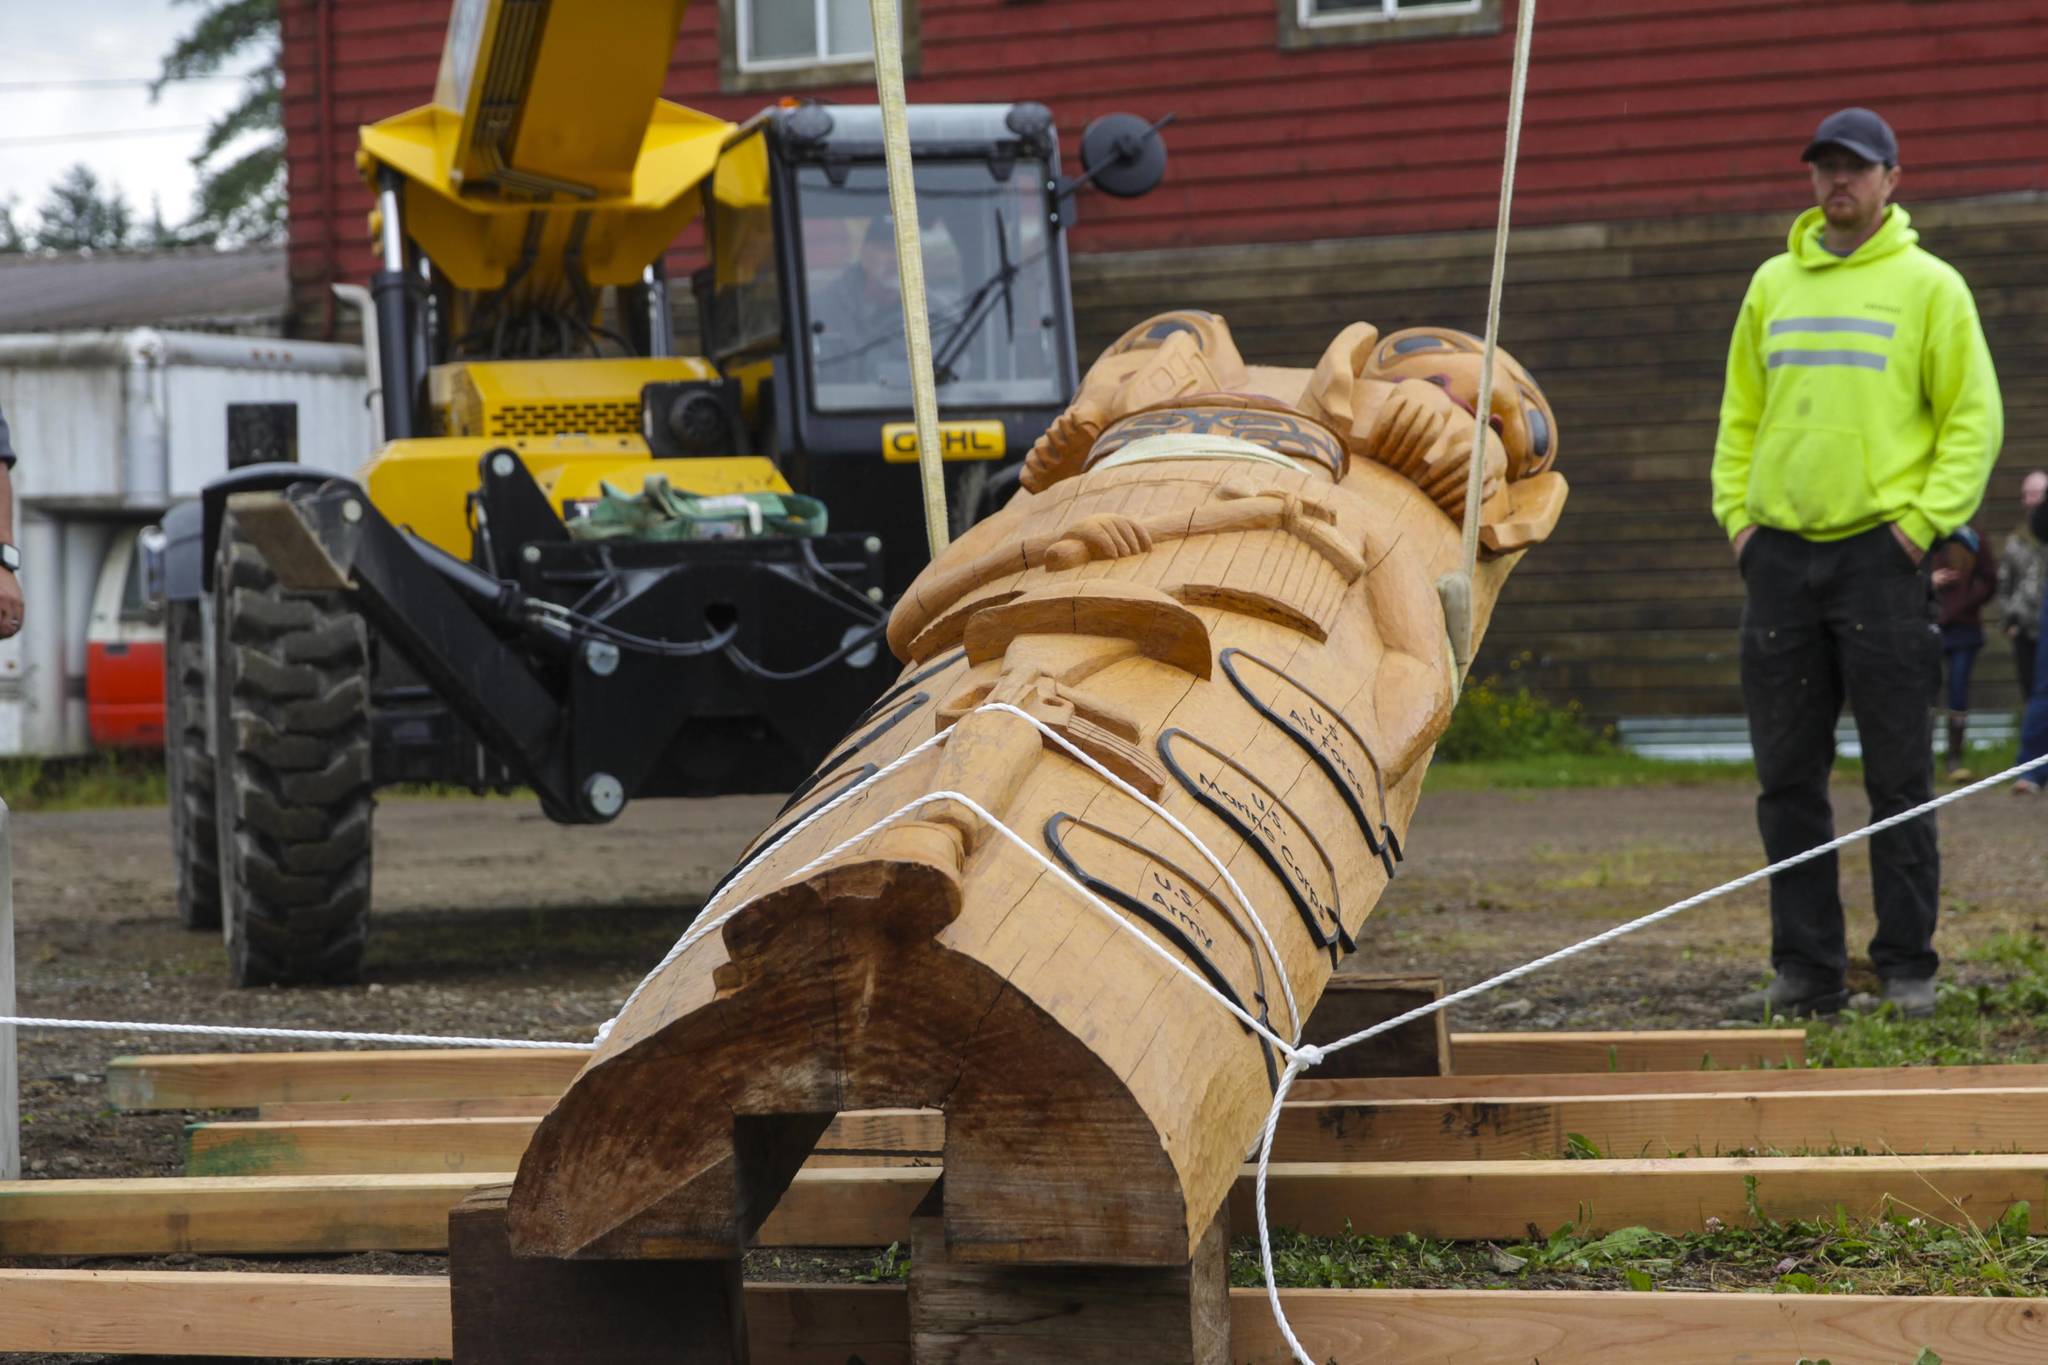 Contractors from Dawson Construction raise a totem pole honoring veterans of the armed services into place in Hoonah on July 24, 2021, in a ceremony attended by hundreds. (Michael S. Lockett / Juneau Empire)